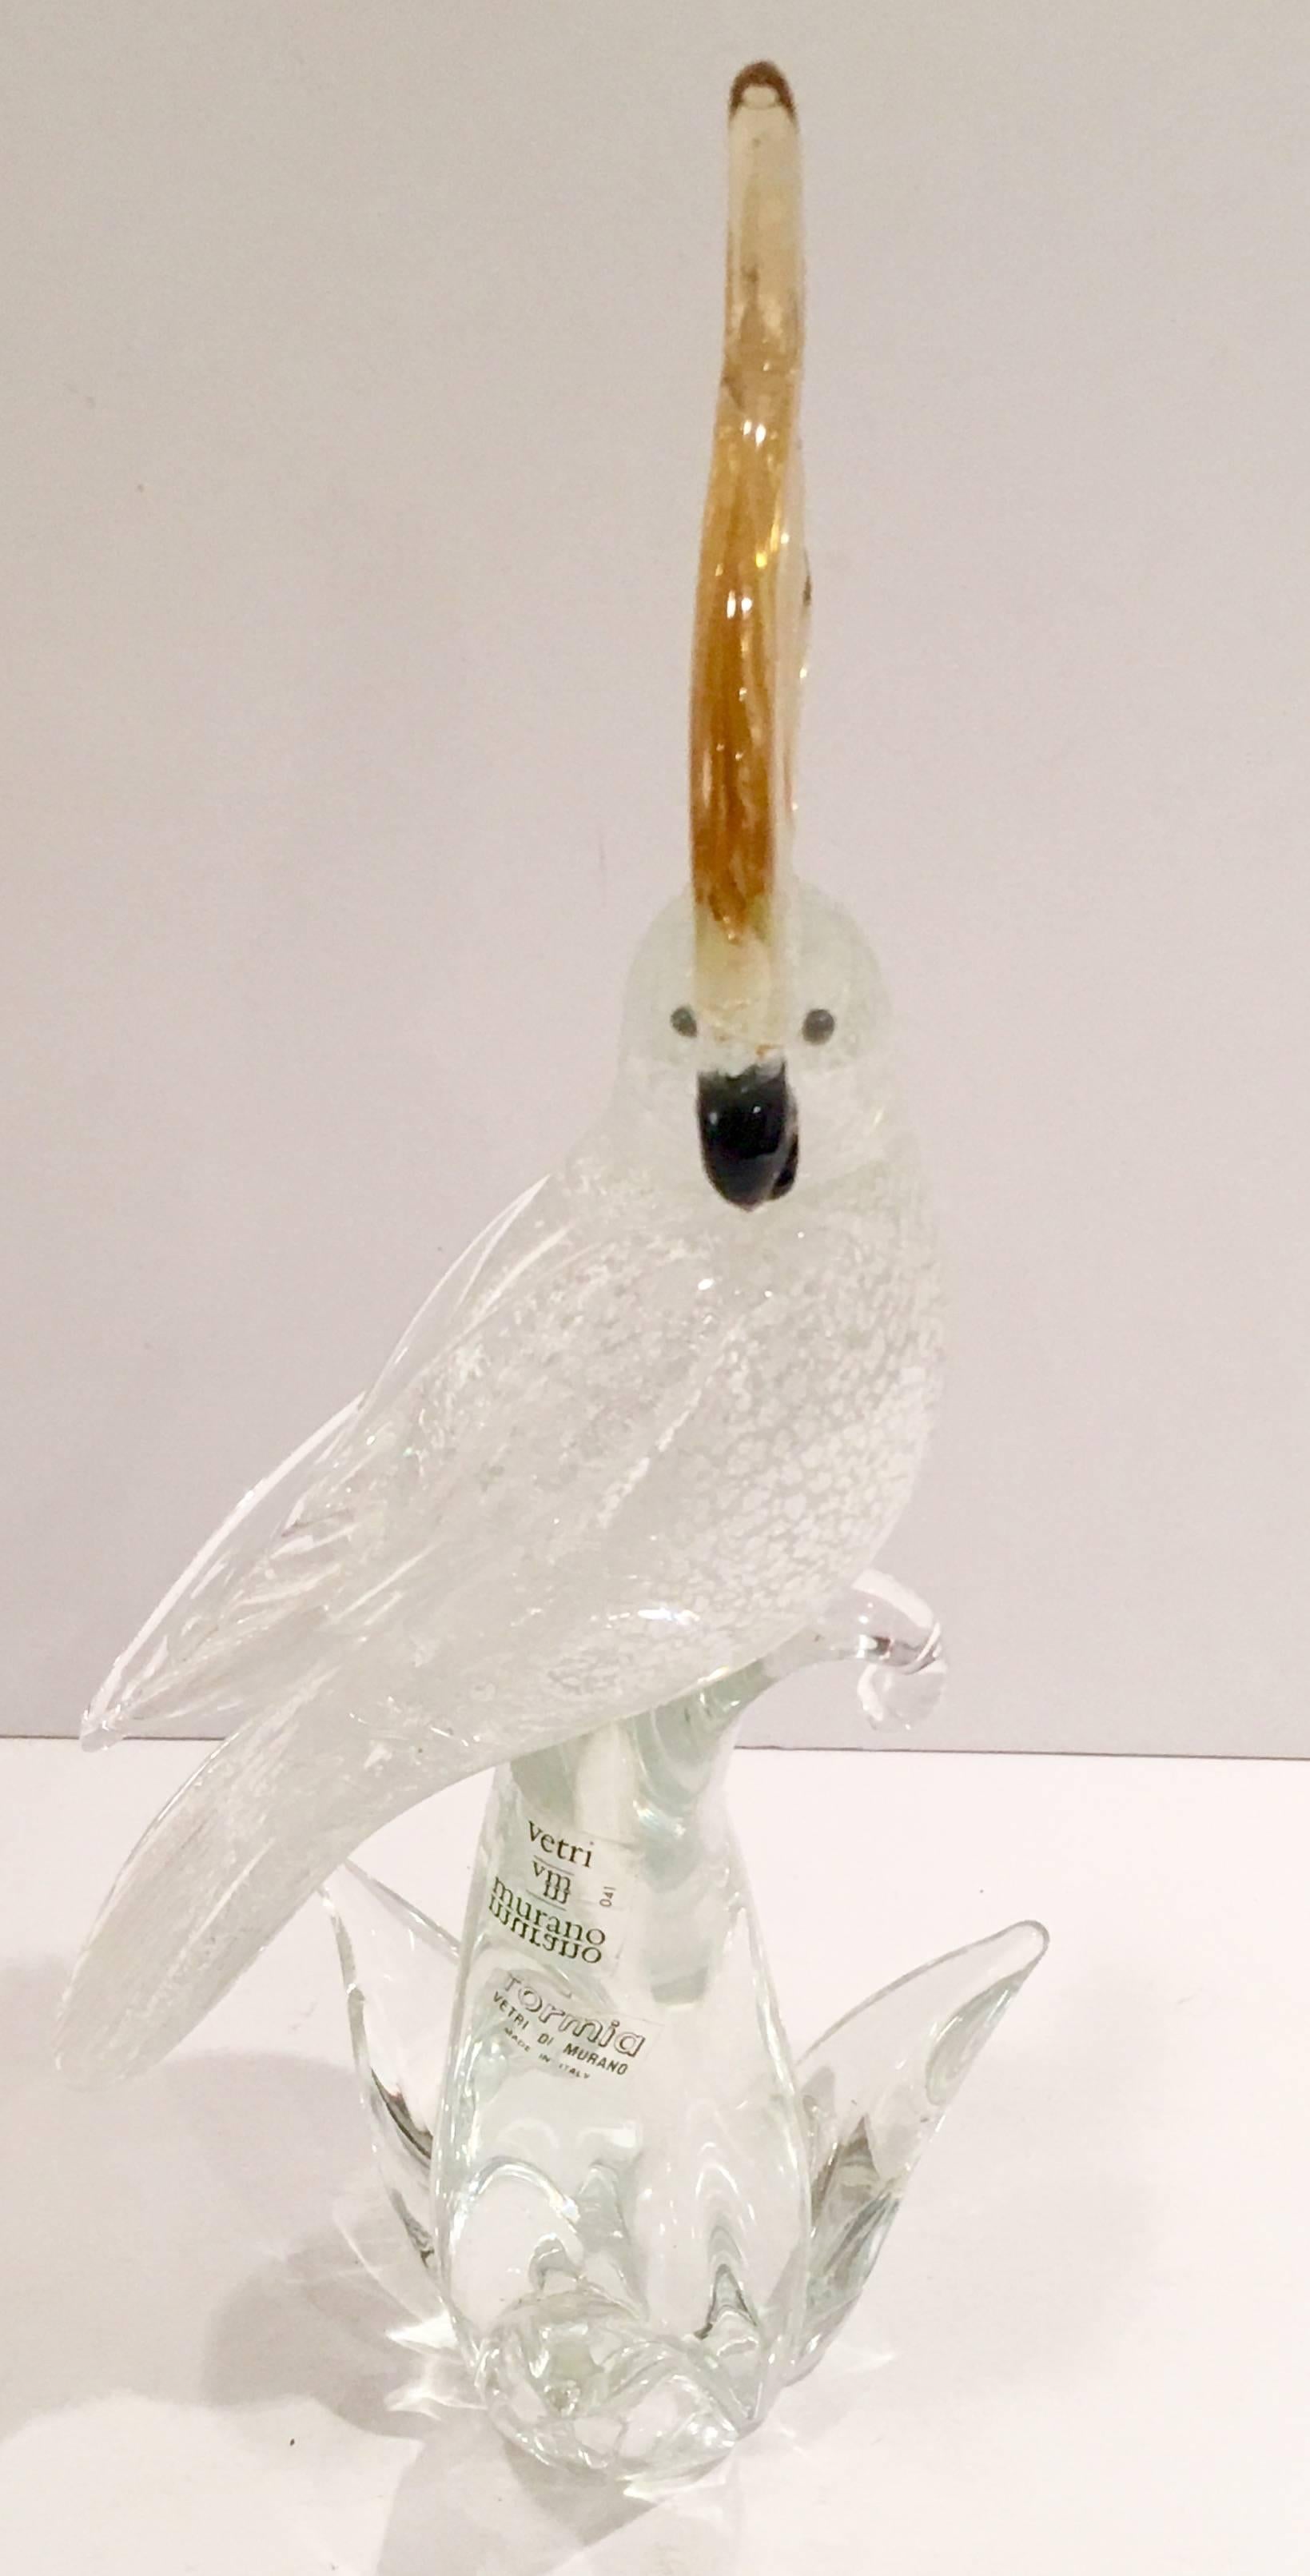 Vintage large Murano Glass Sommerso silver inclusion Cockatoo perching sculpture by, Formia Vetri Di Murano. This sculpture is done in crystal clear glass with silver inclusion, gold heat and black beak and eyes in black and original manufacturer